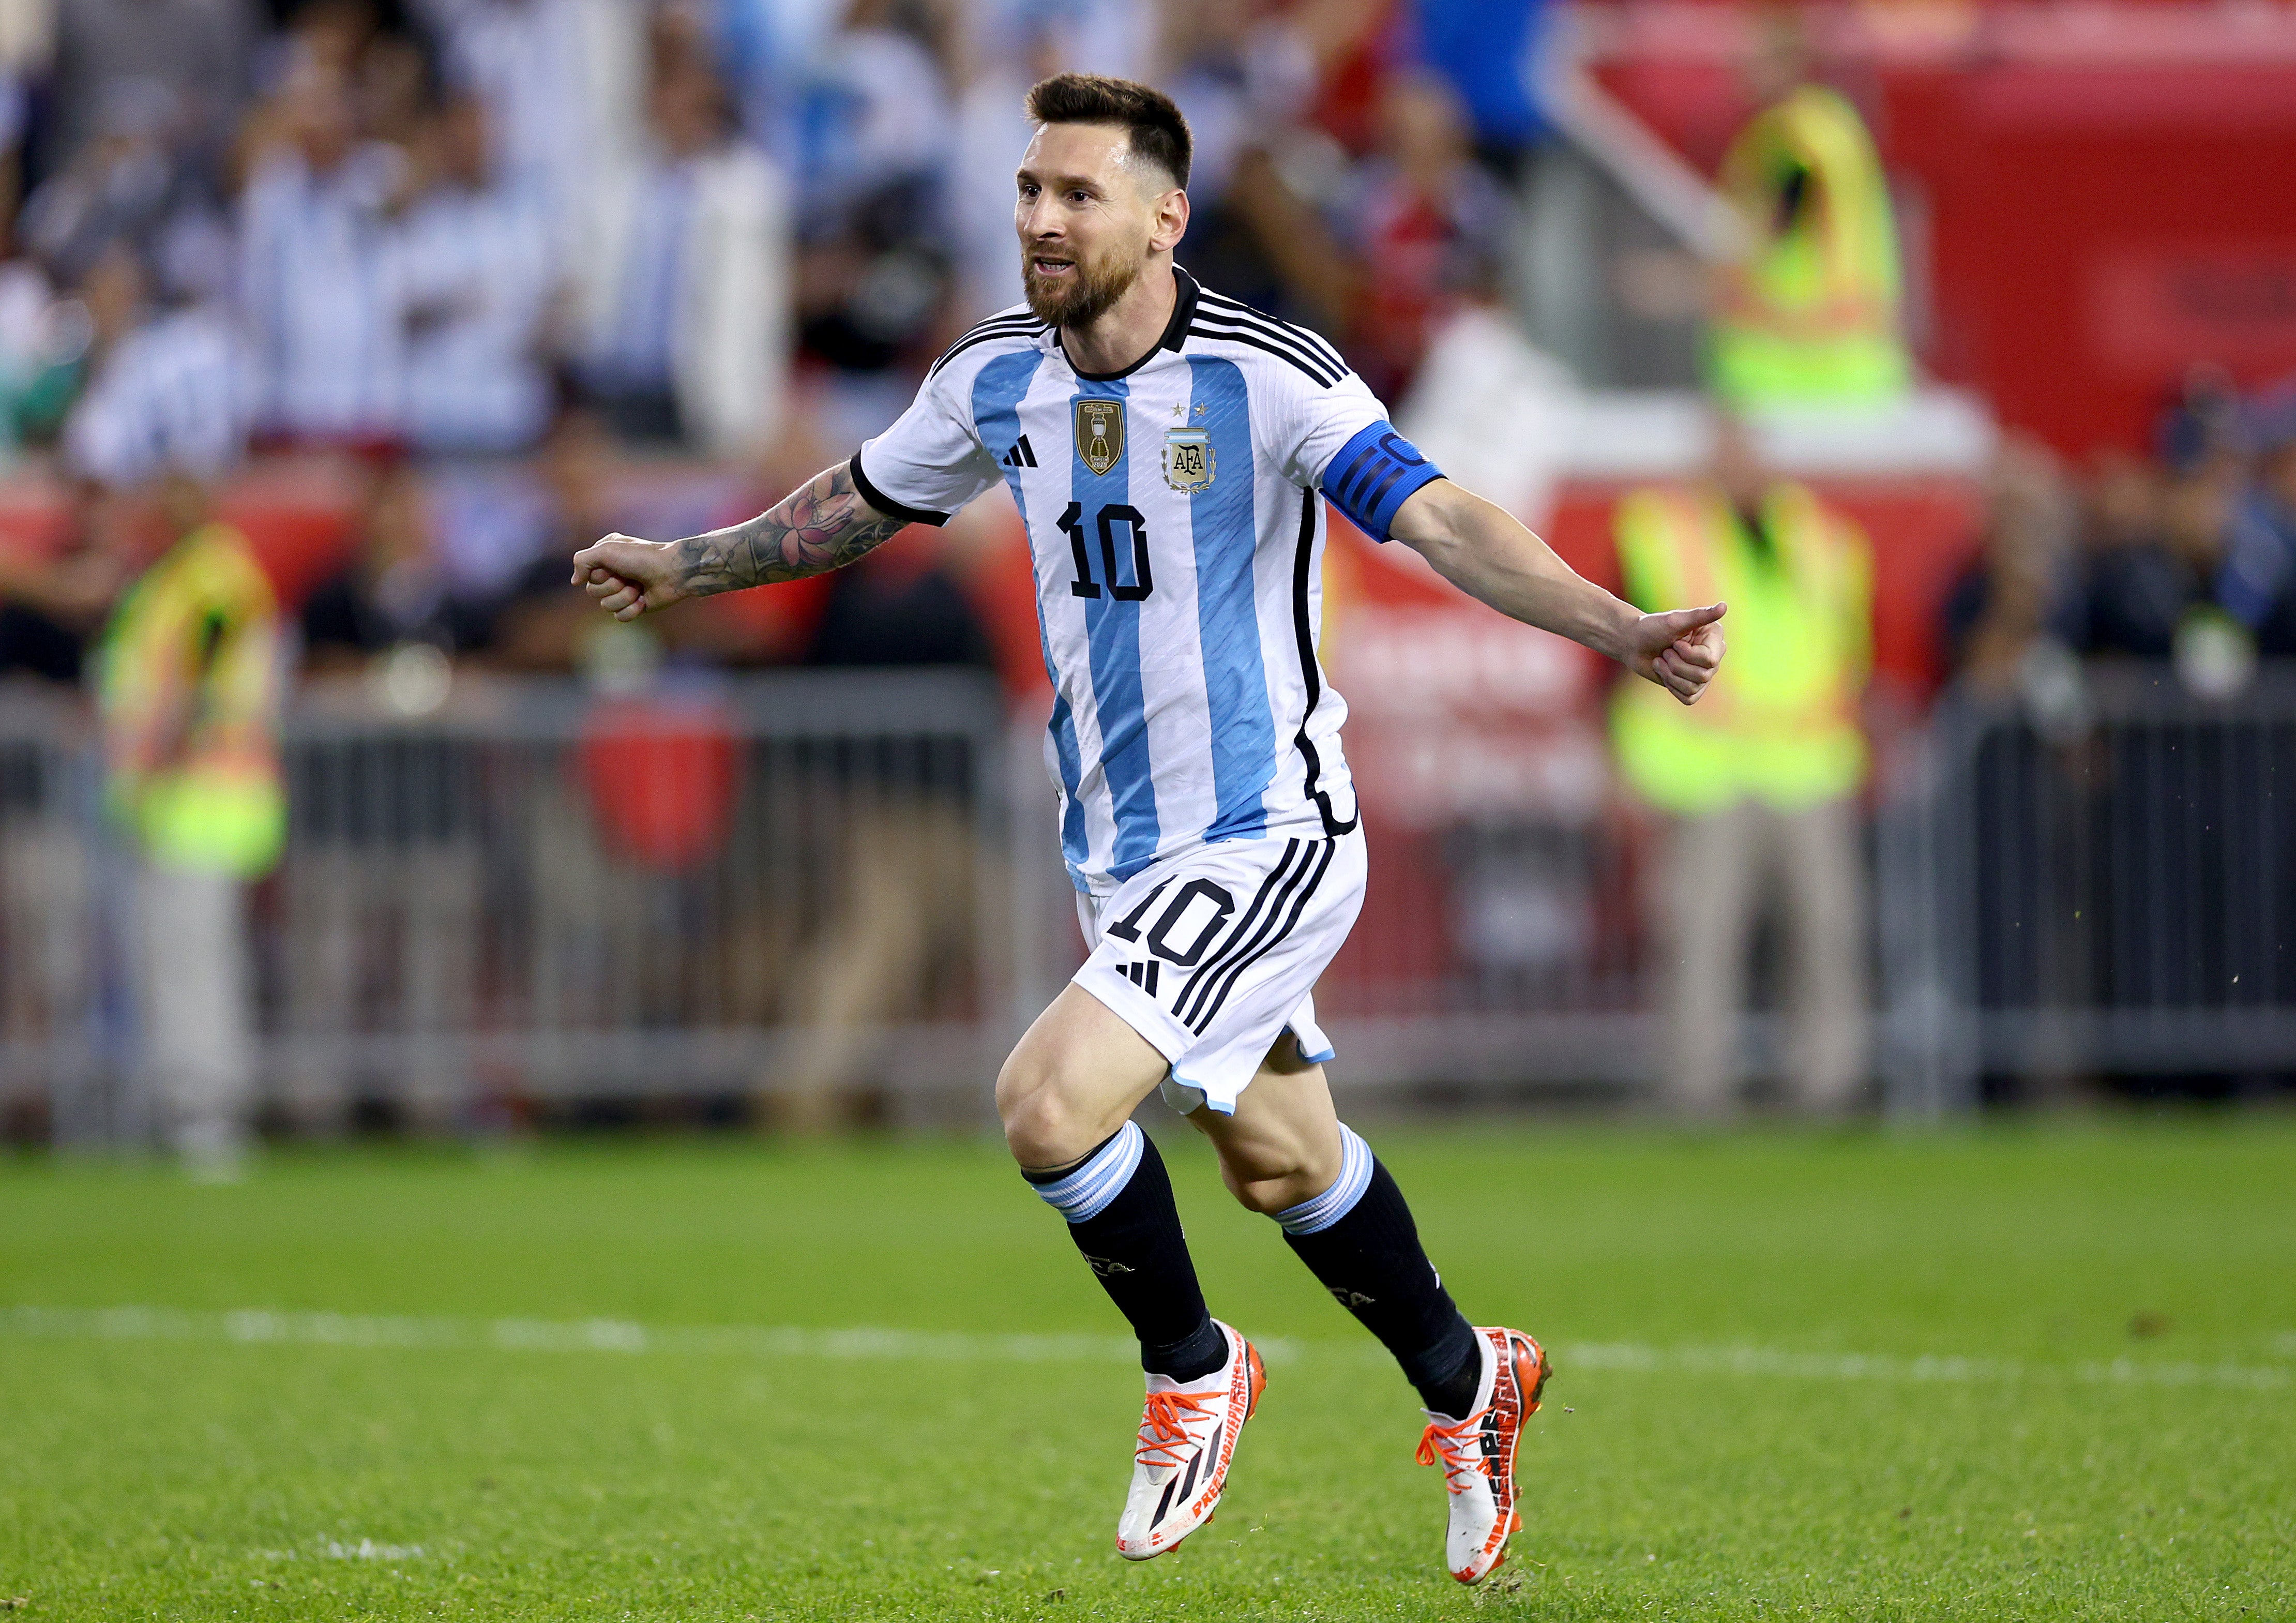 Lionel Messi is looking to end his World Cup career with a fairytale finish